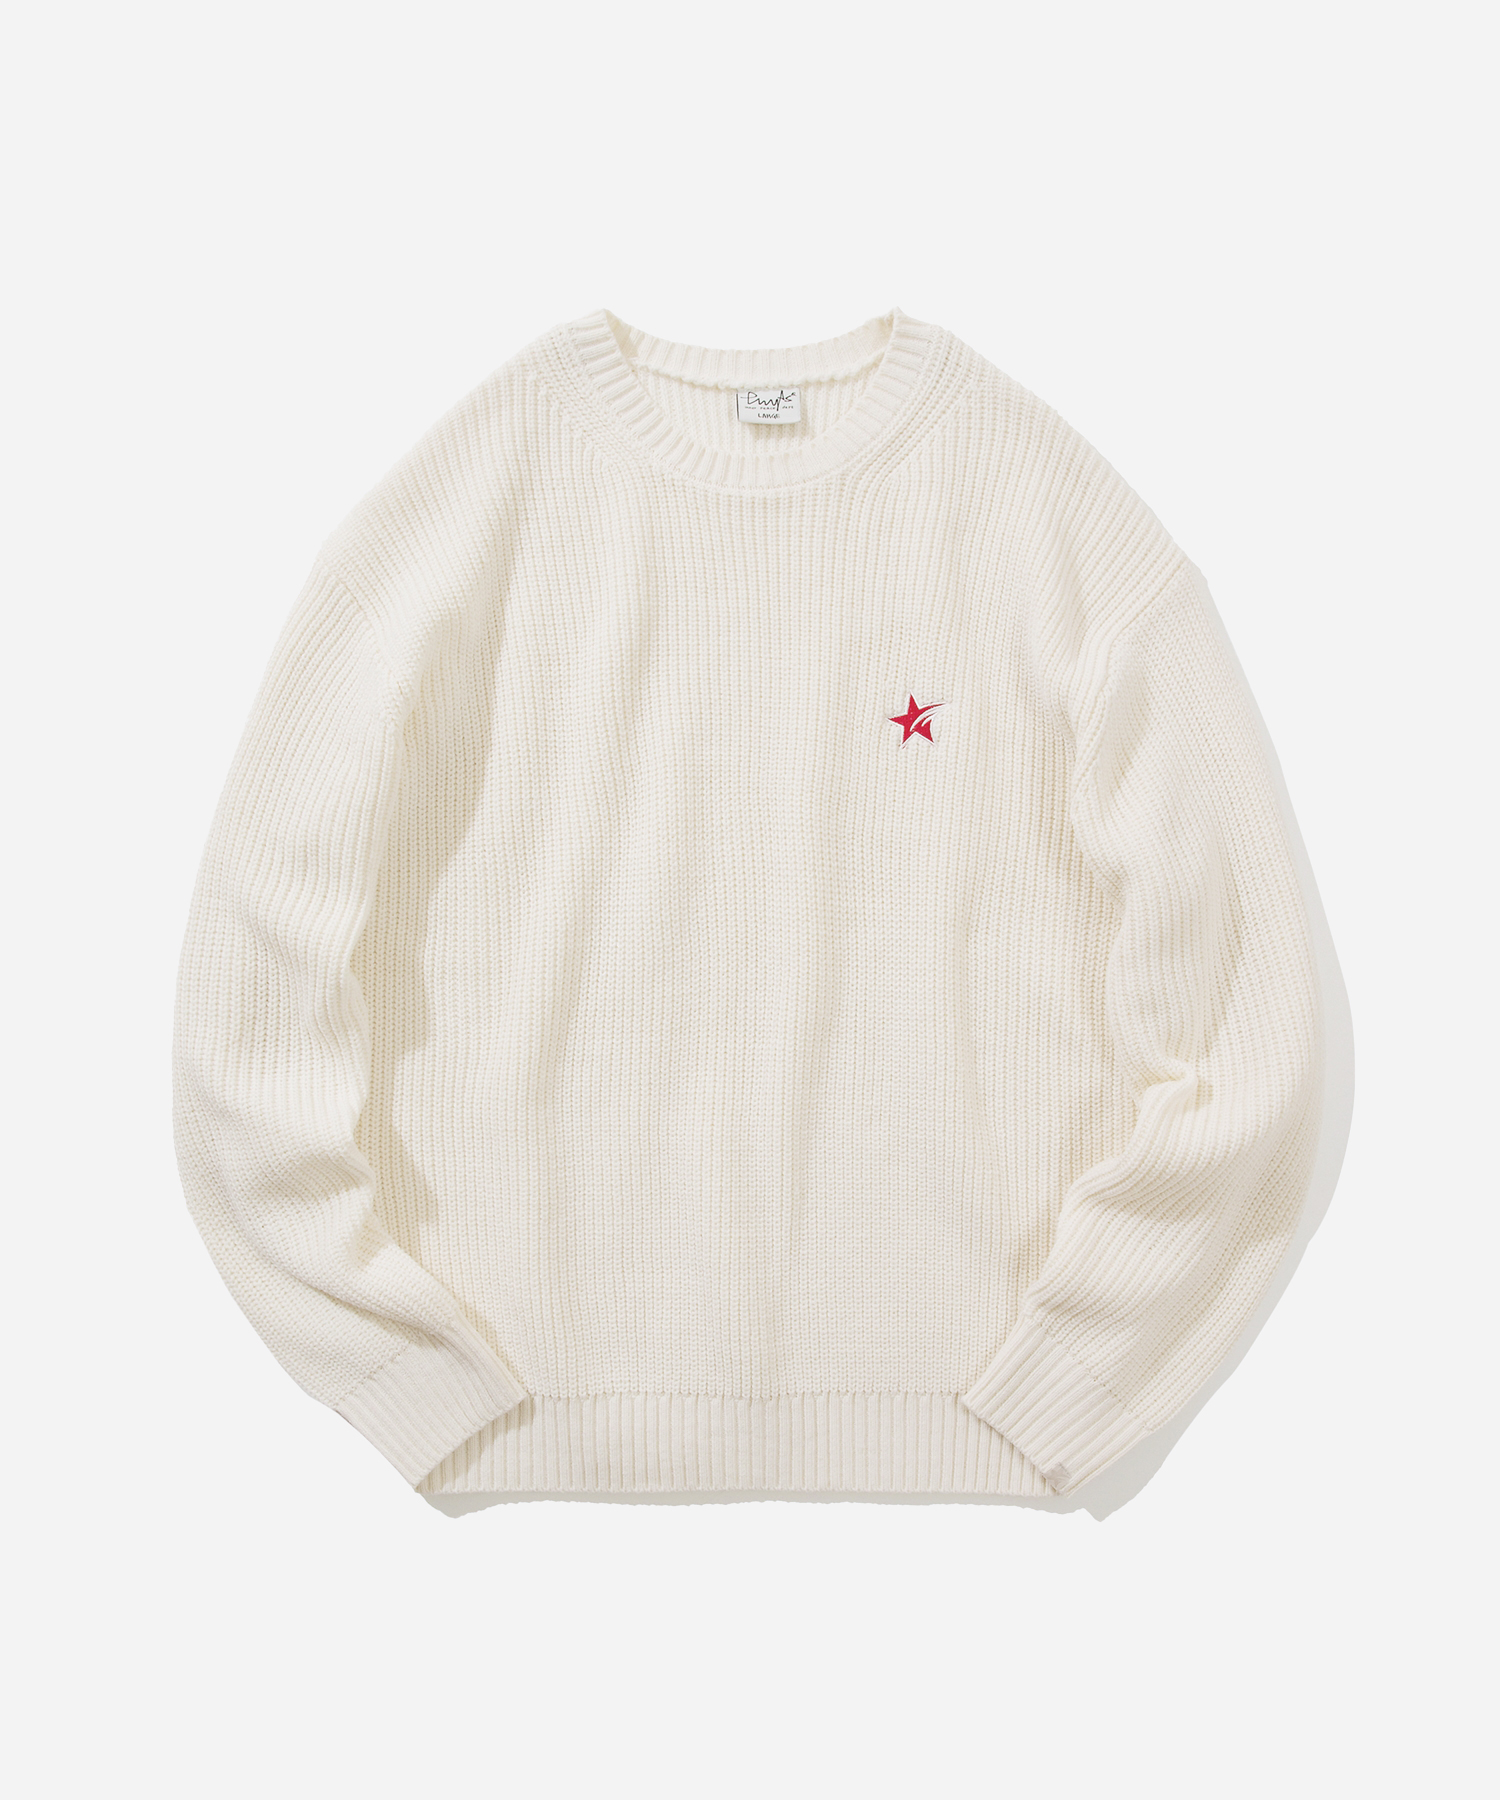 SMALL STARDUST KNIT IVORY